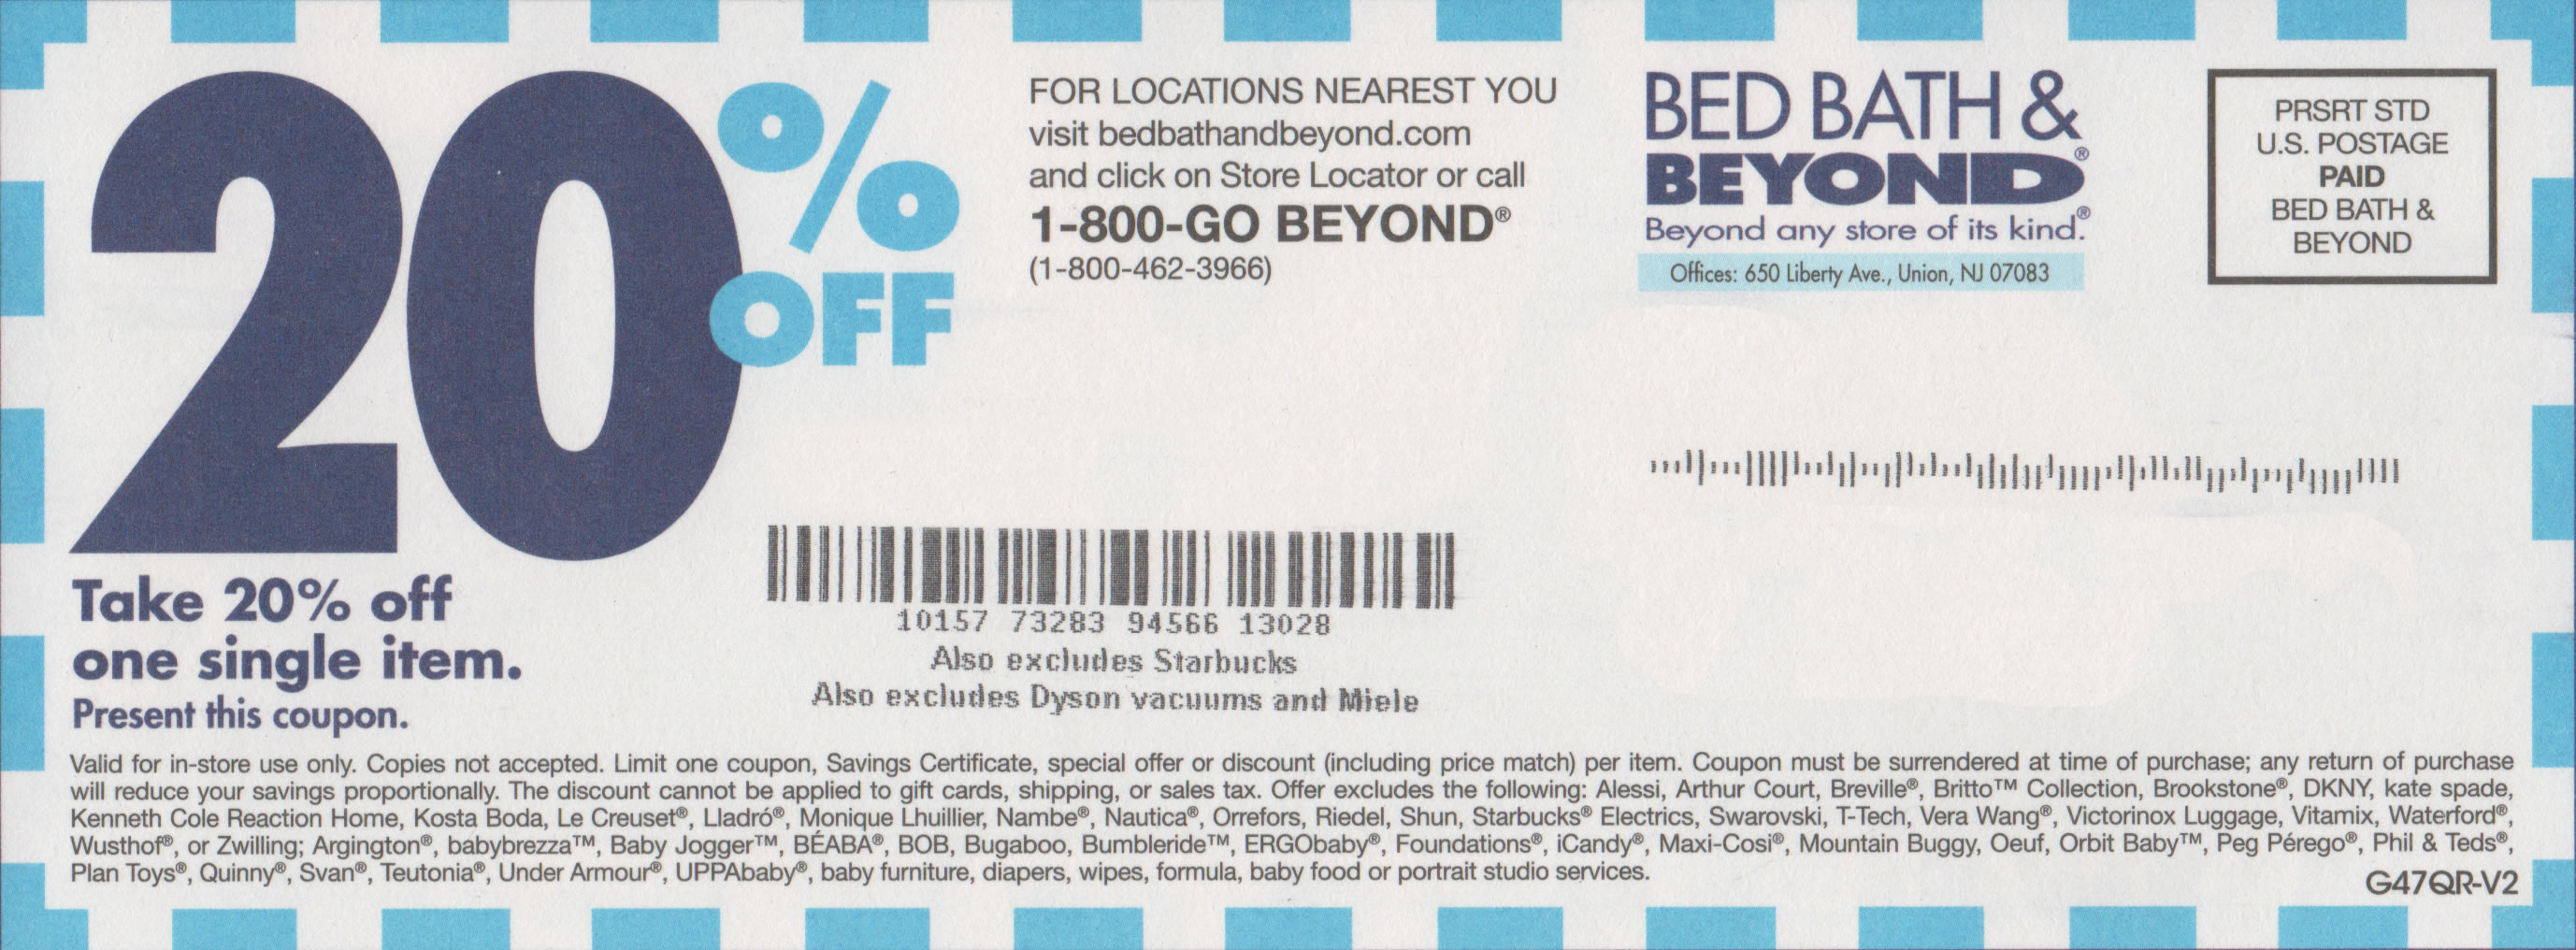 bed-bath-and-beyond-coupons-and-printable-coupons-bed-bath-and-beyond